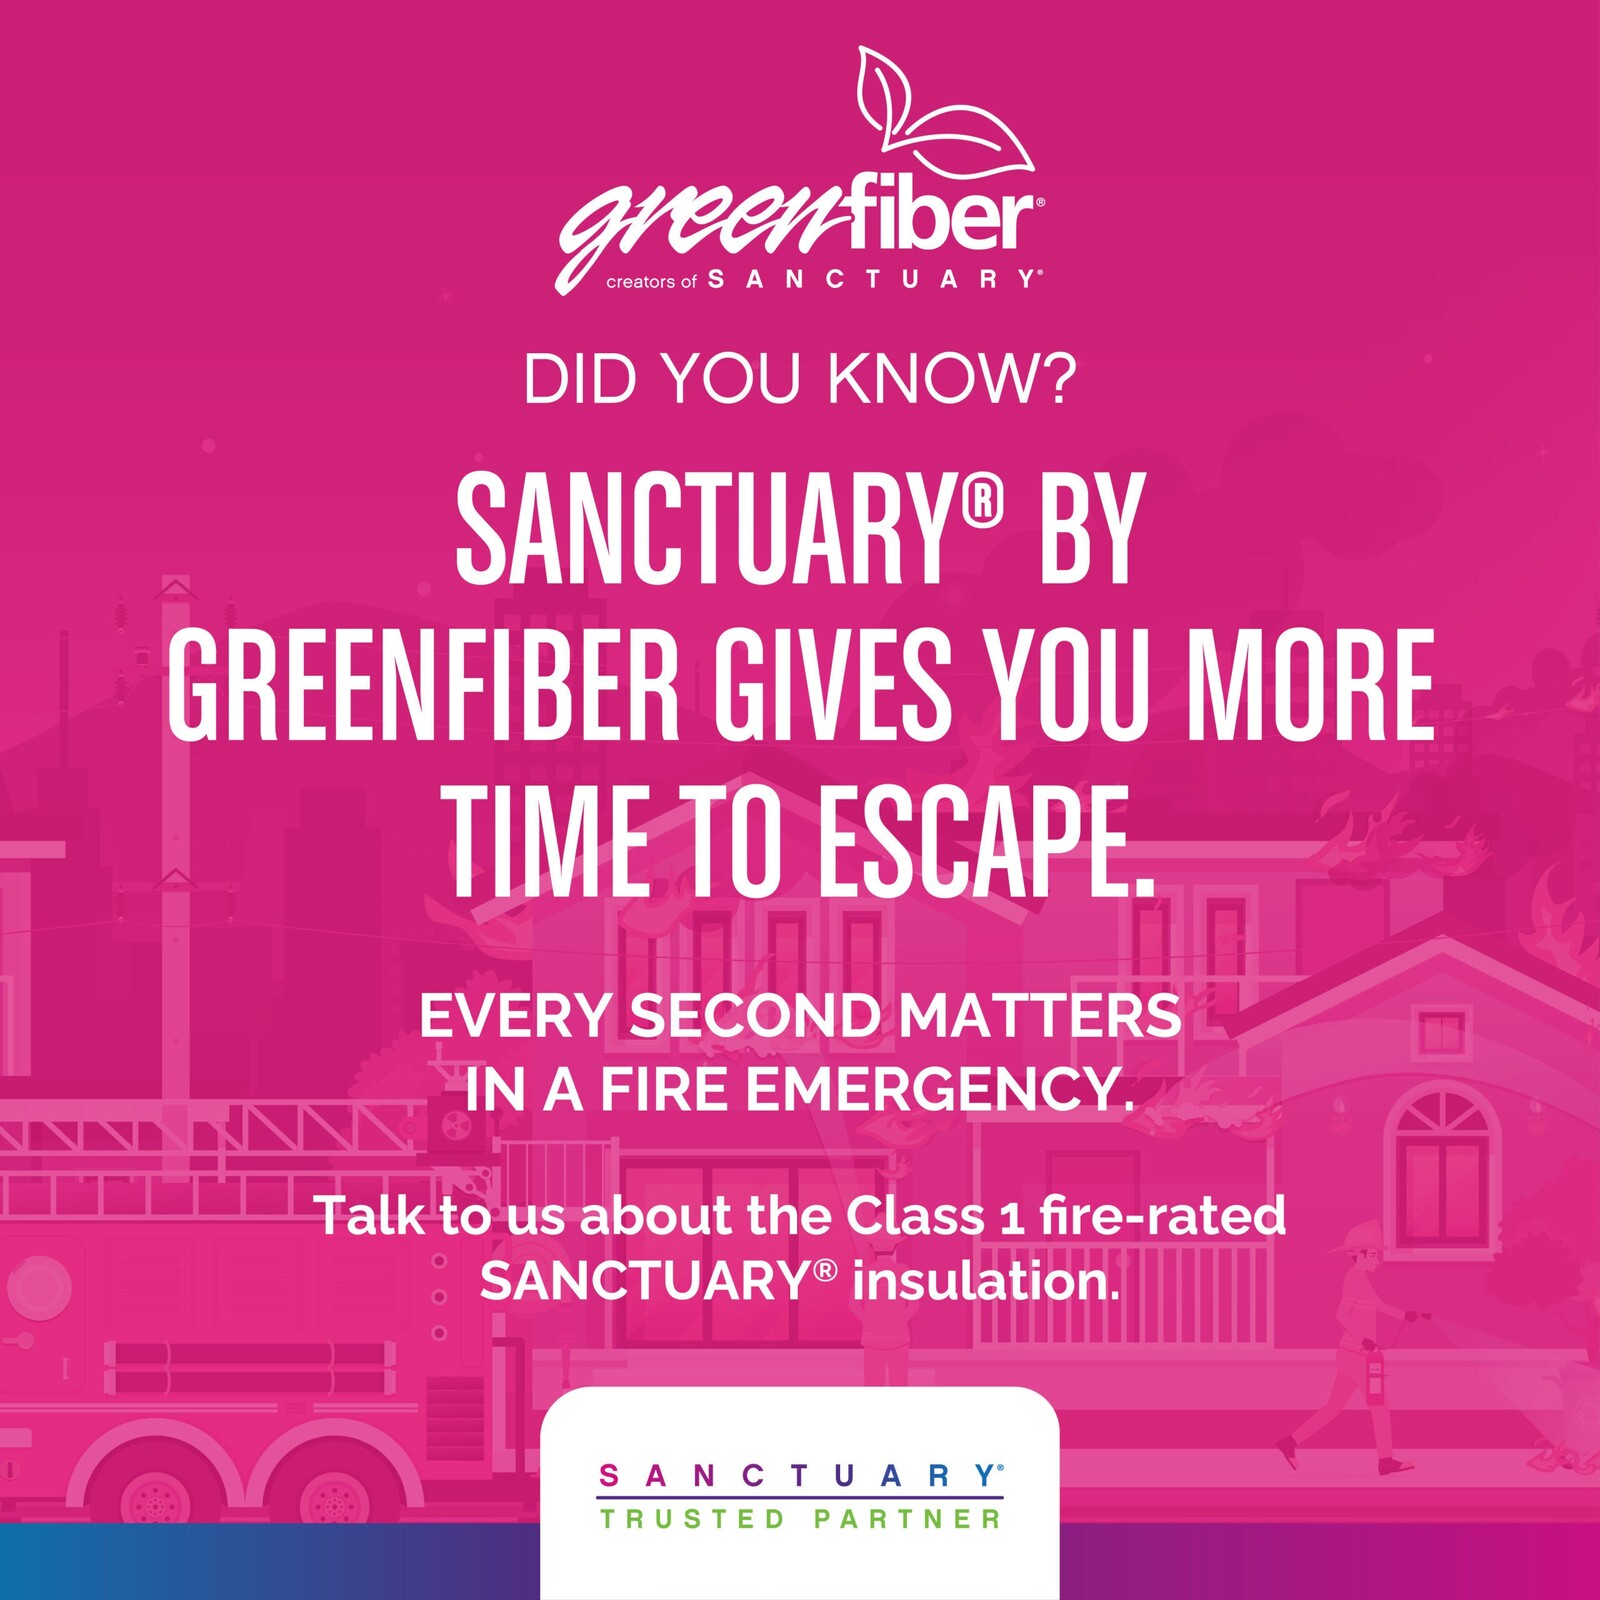 "Greenfiber creators of Sanctuary. Did you know? Sanctuary by greenfiber gives you more time to escape. Every second matters in a fire emergency. Talk to us about the class 1 fire-rated sanctuary insulation. Sanctuary Trusted Partner."